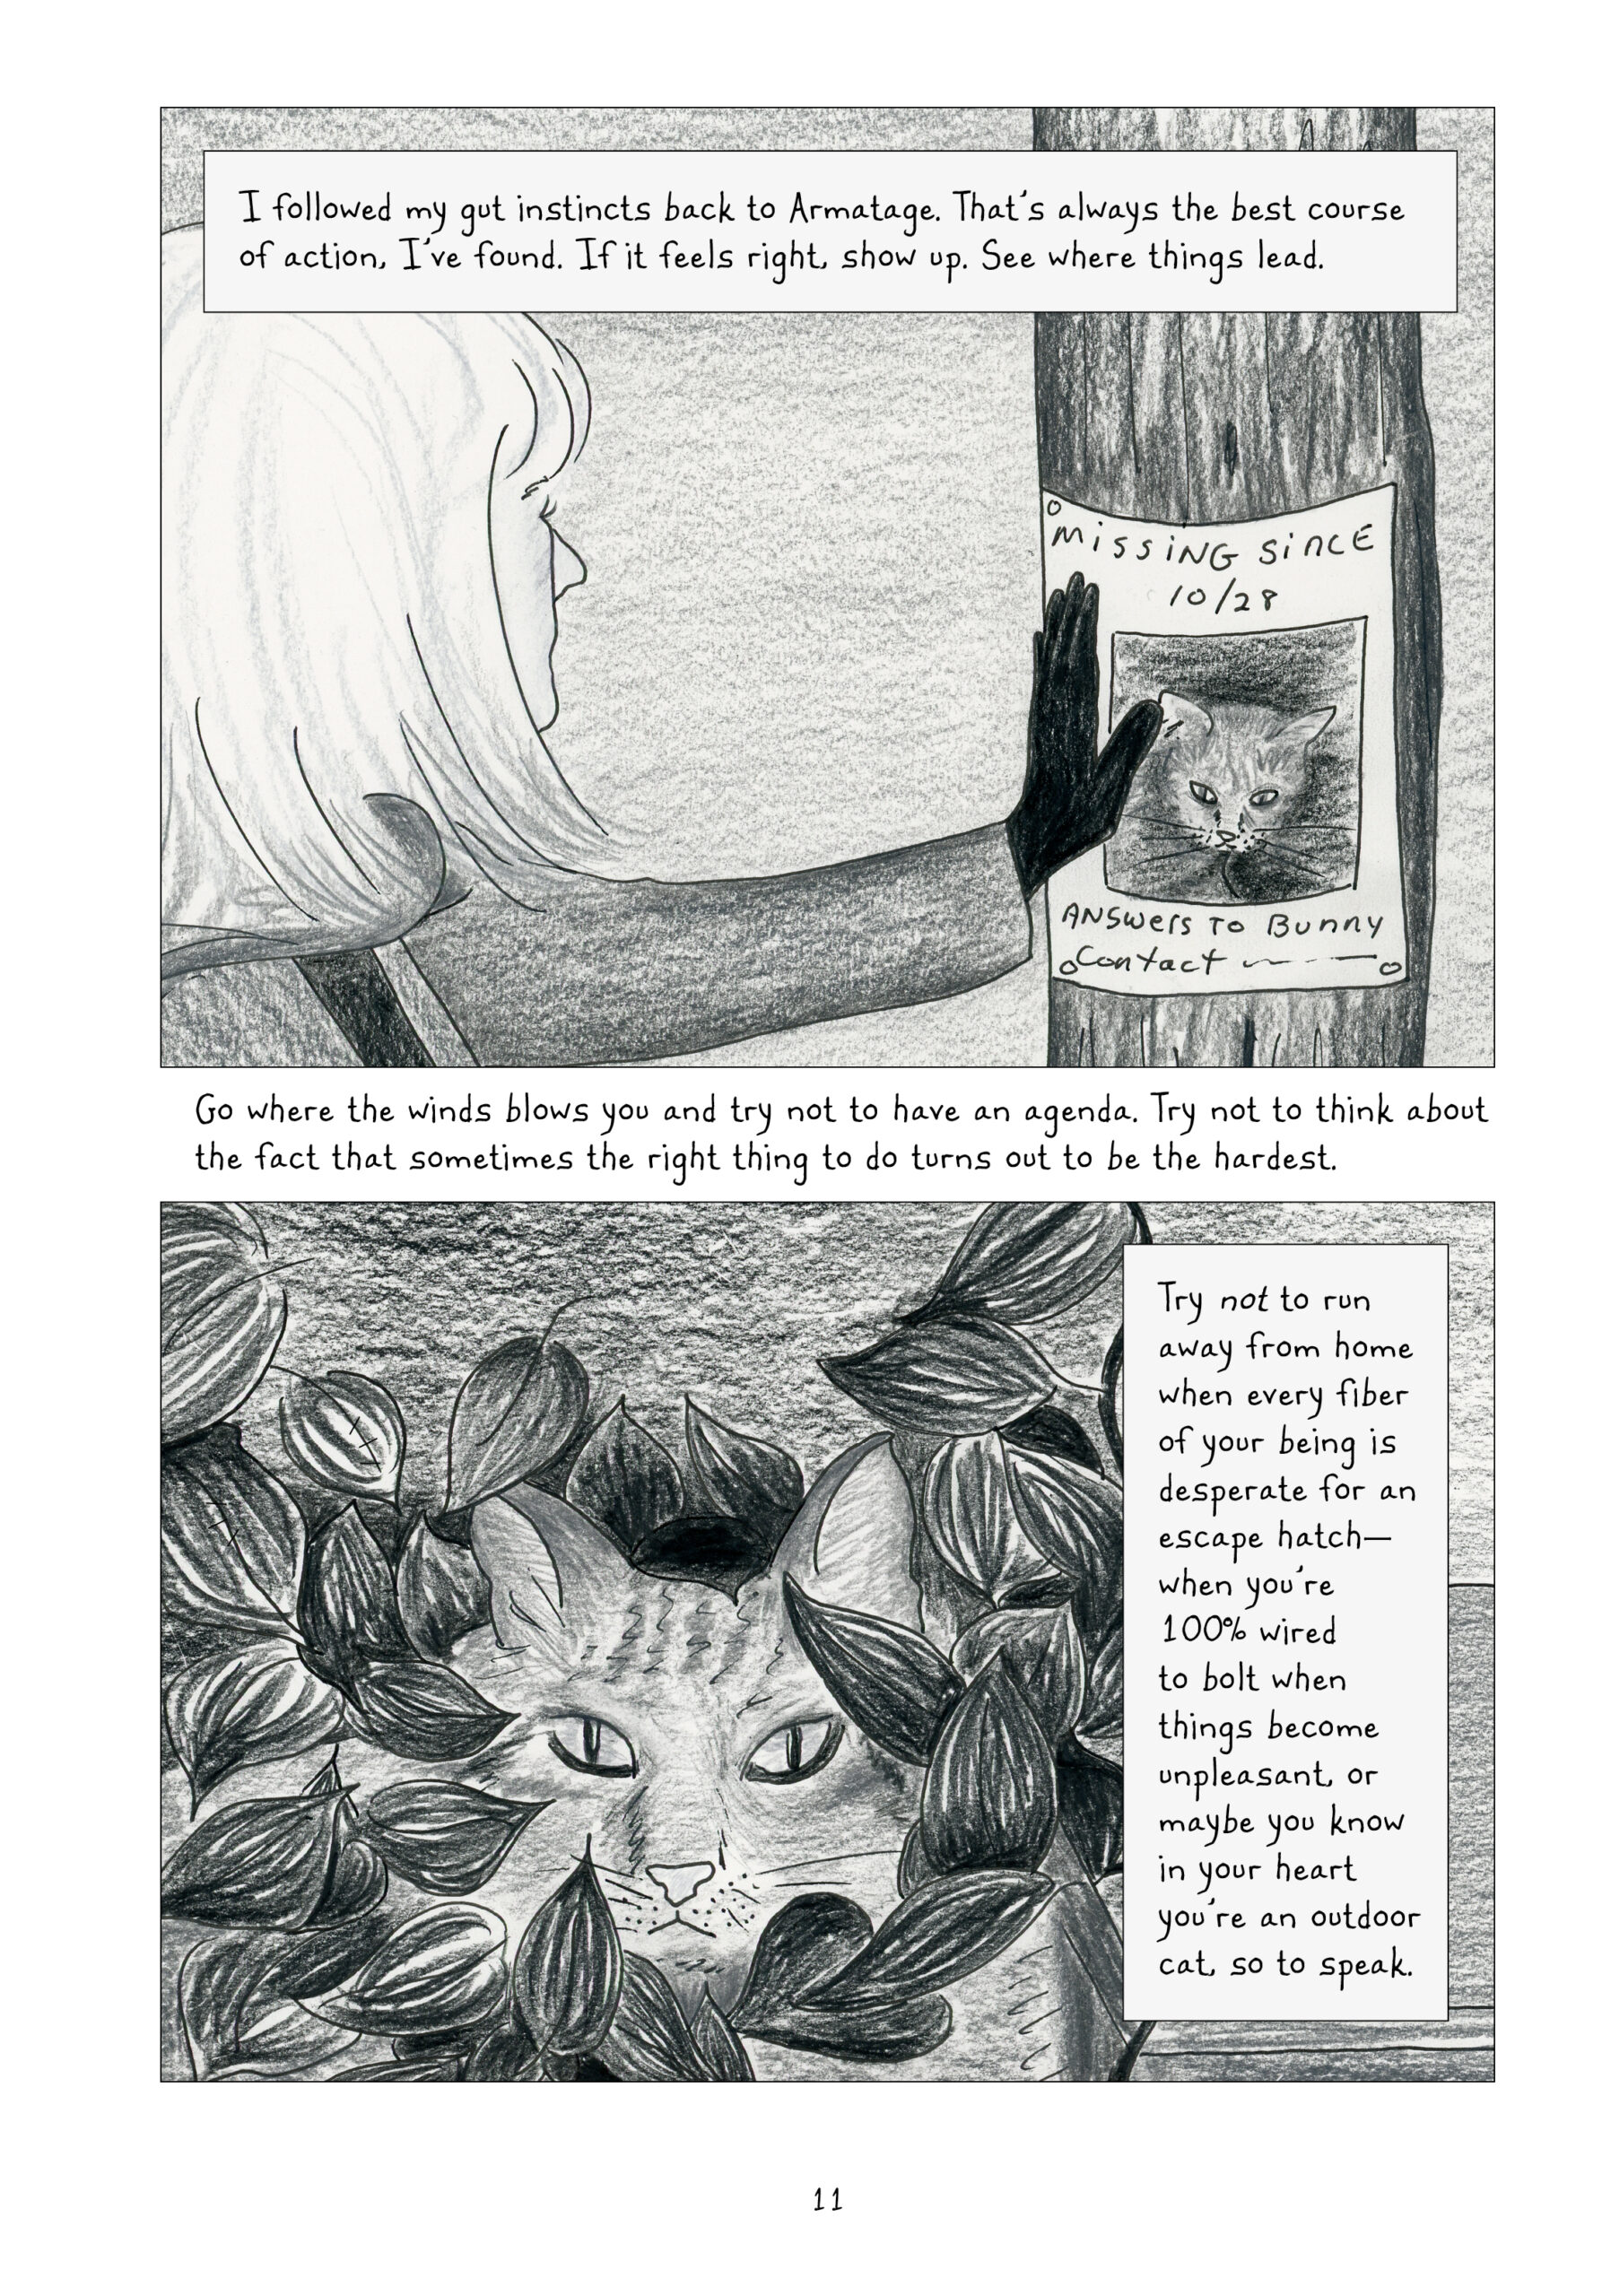 Two black and white panels. Lynn places her hand on a flyer of a missing cat posted to a telephone pole. The second panel zooms in on the cat's face, now surrounded by leaves. Lynn reflects on following her gut instincts, going with the flow, and trying with all your might not to run away from home even when you are desperate to escape or know in your heart you are an outdoor cat.